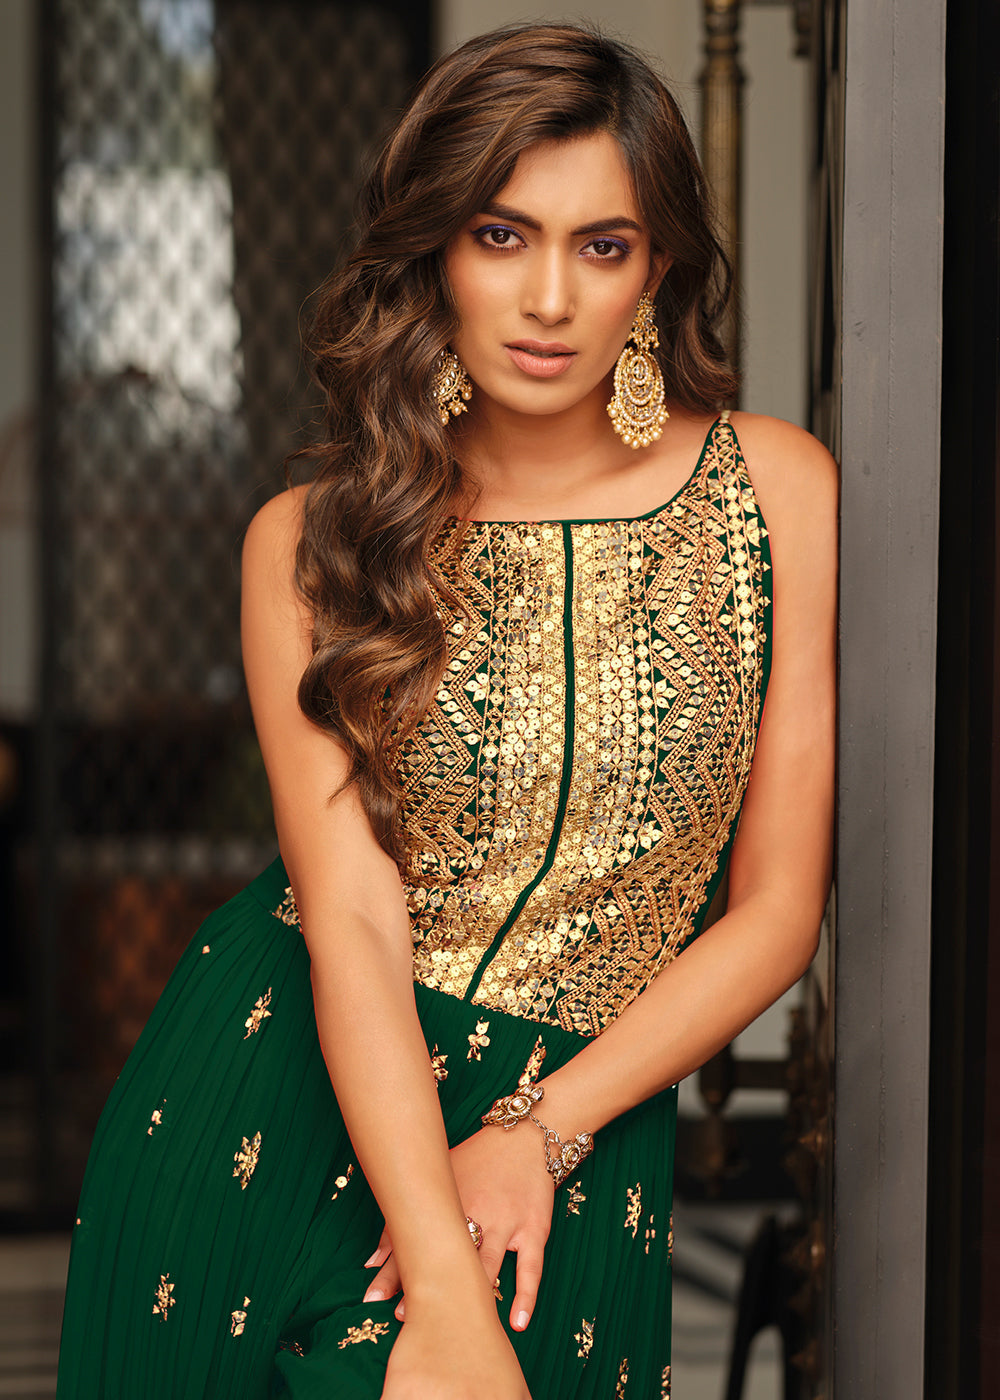 Buy Now Dark Green Indo-Western Embroidered Jumpsuit Online in USA, UK, Canada, Germany & Worldwide at Empress Clothing.